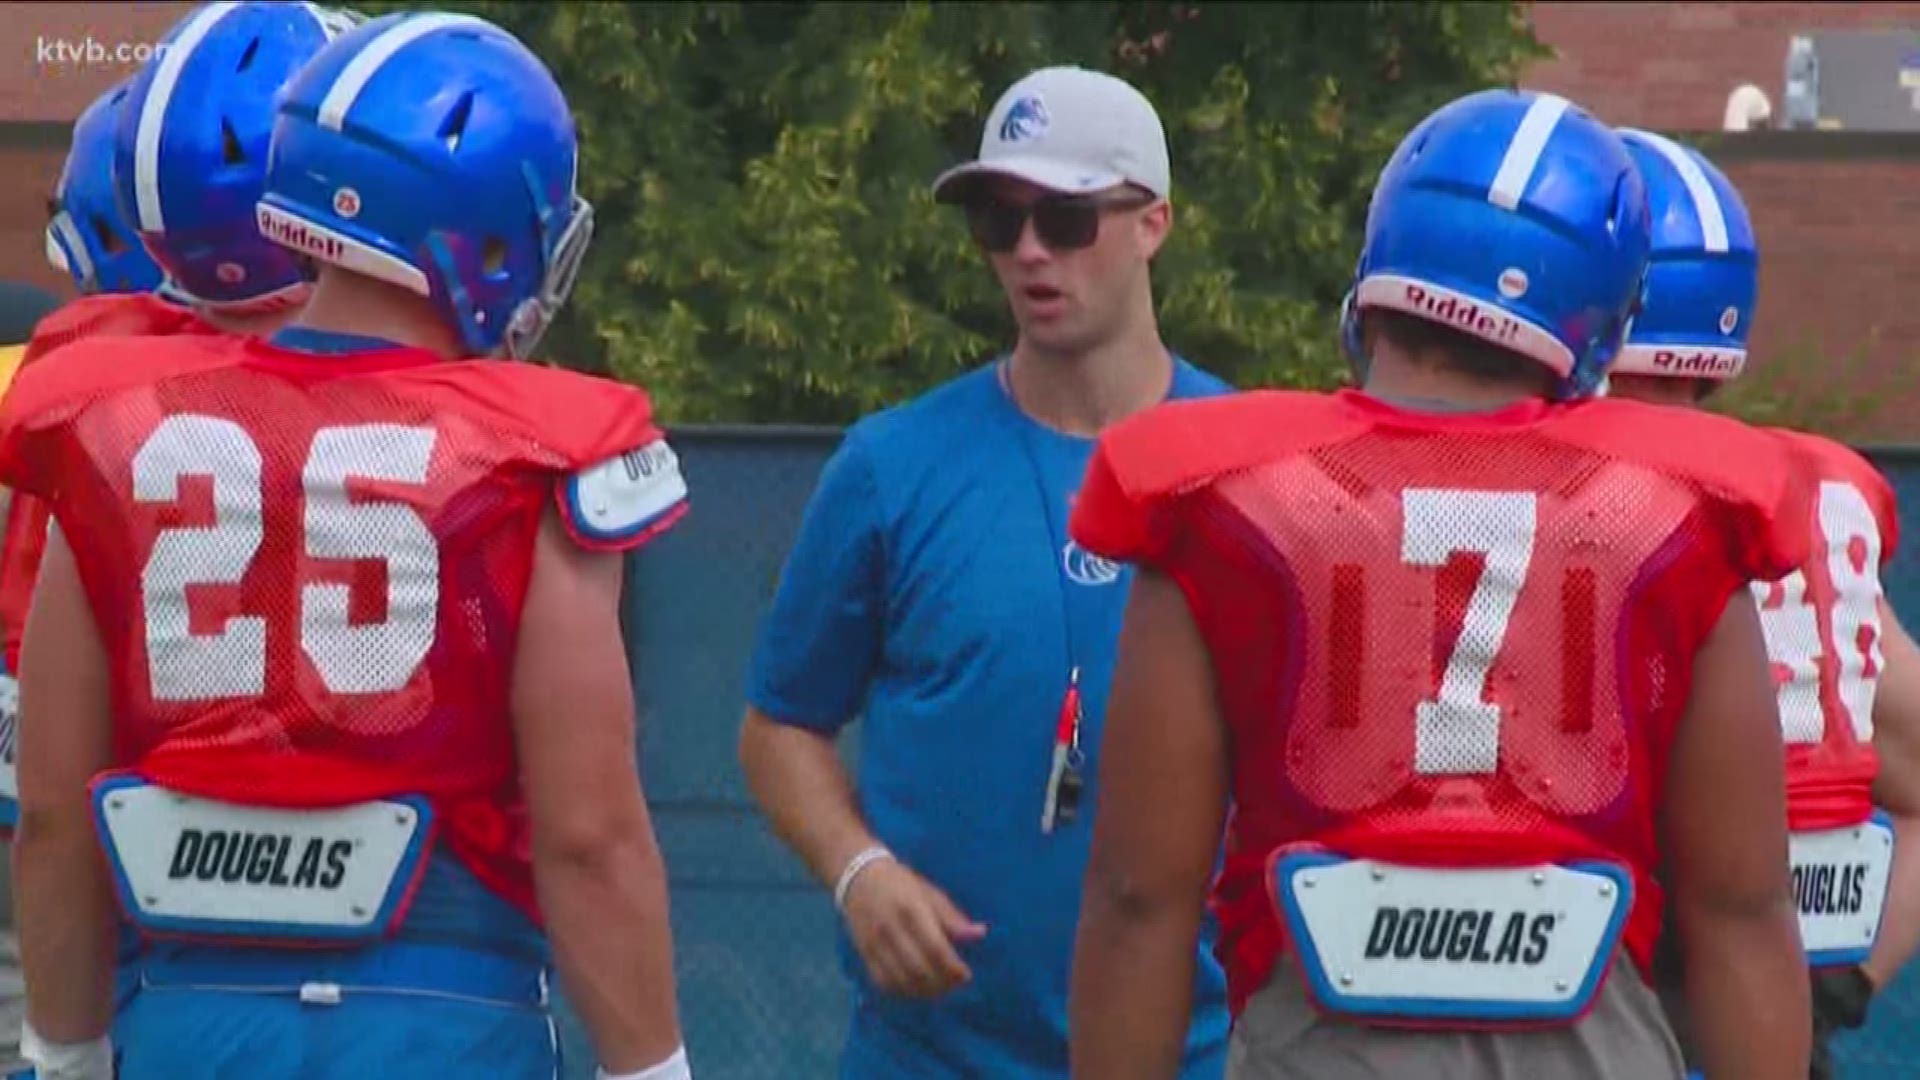 KTVB's Jay Tust and Will Hall analyze all the positions on the defensive side of the ball. The Broncos' have most of their defensive starters return this season, which brings massive expectations for the Boise State defense.